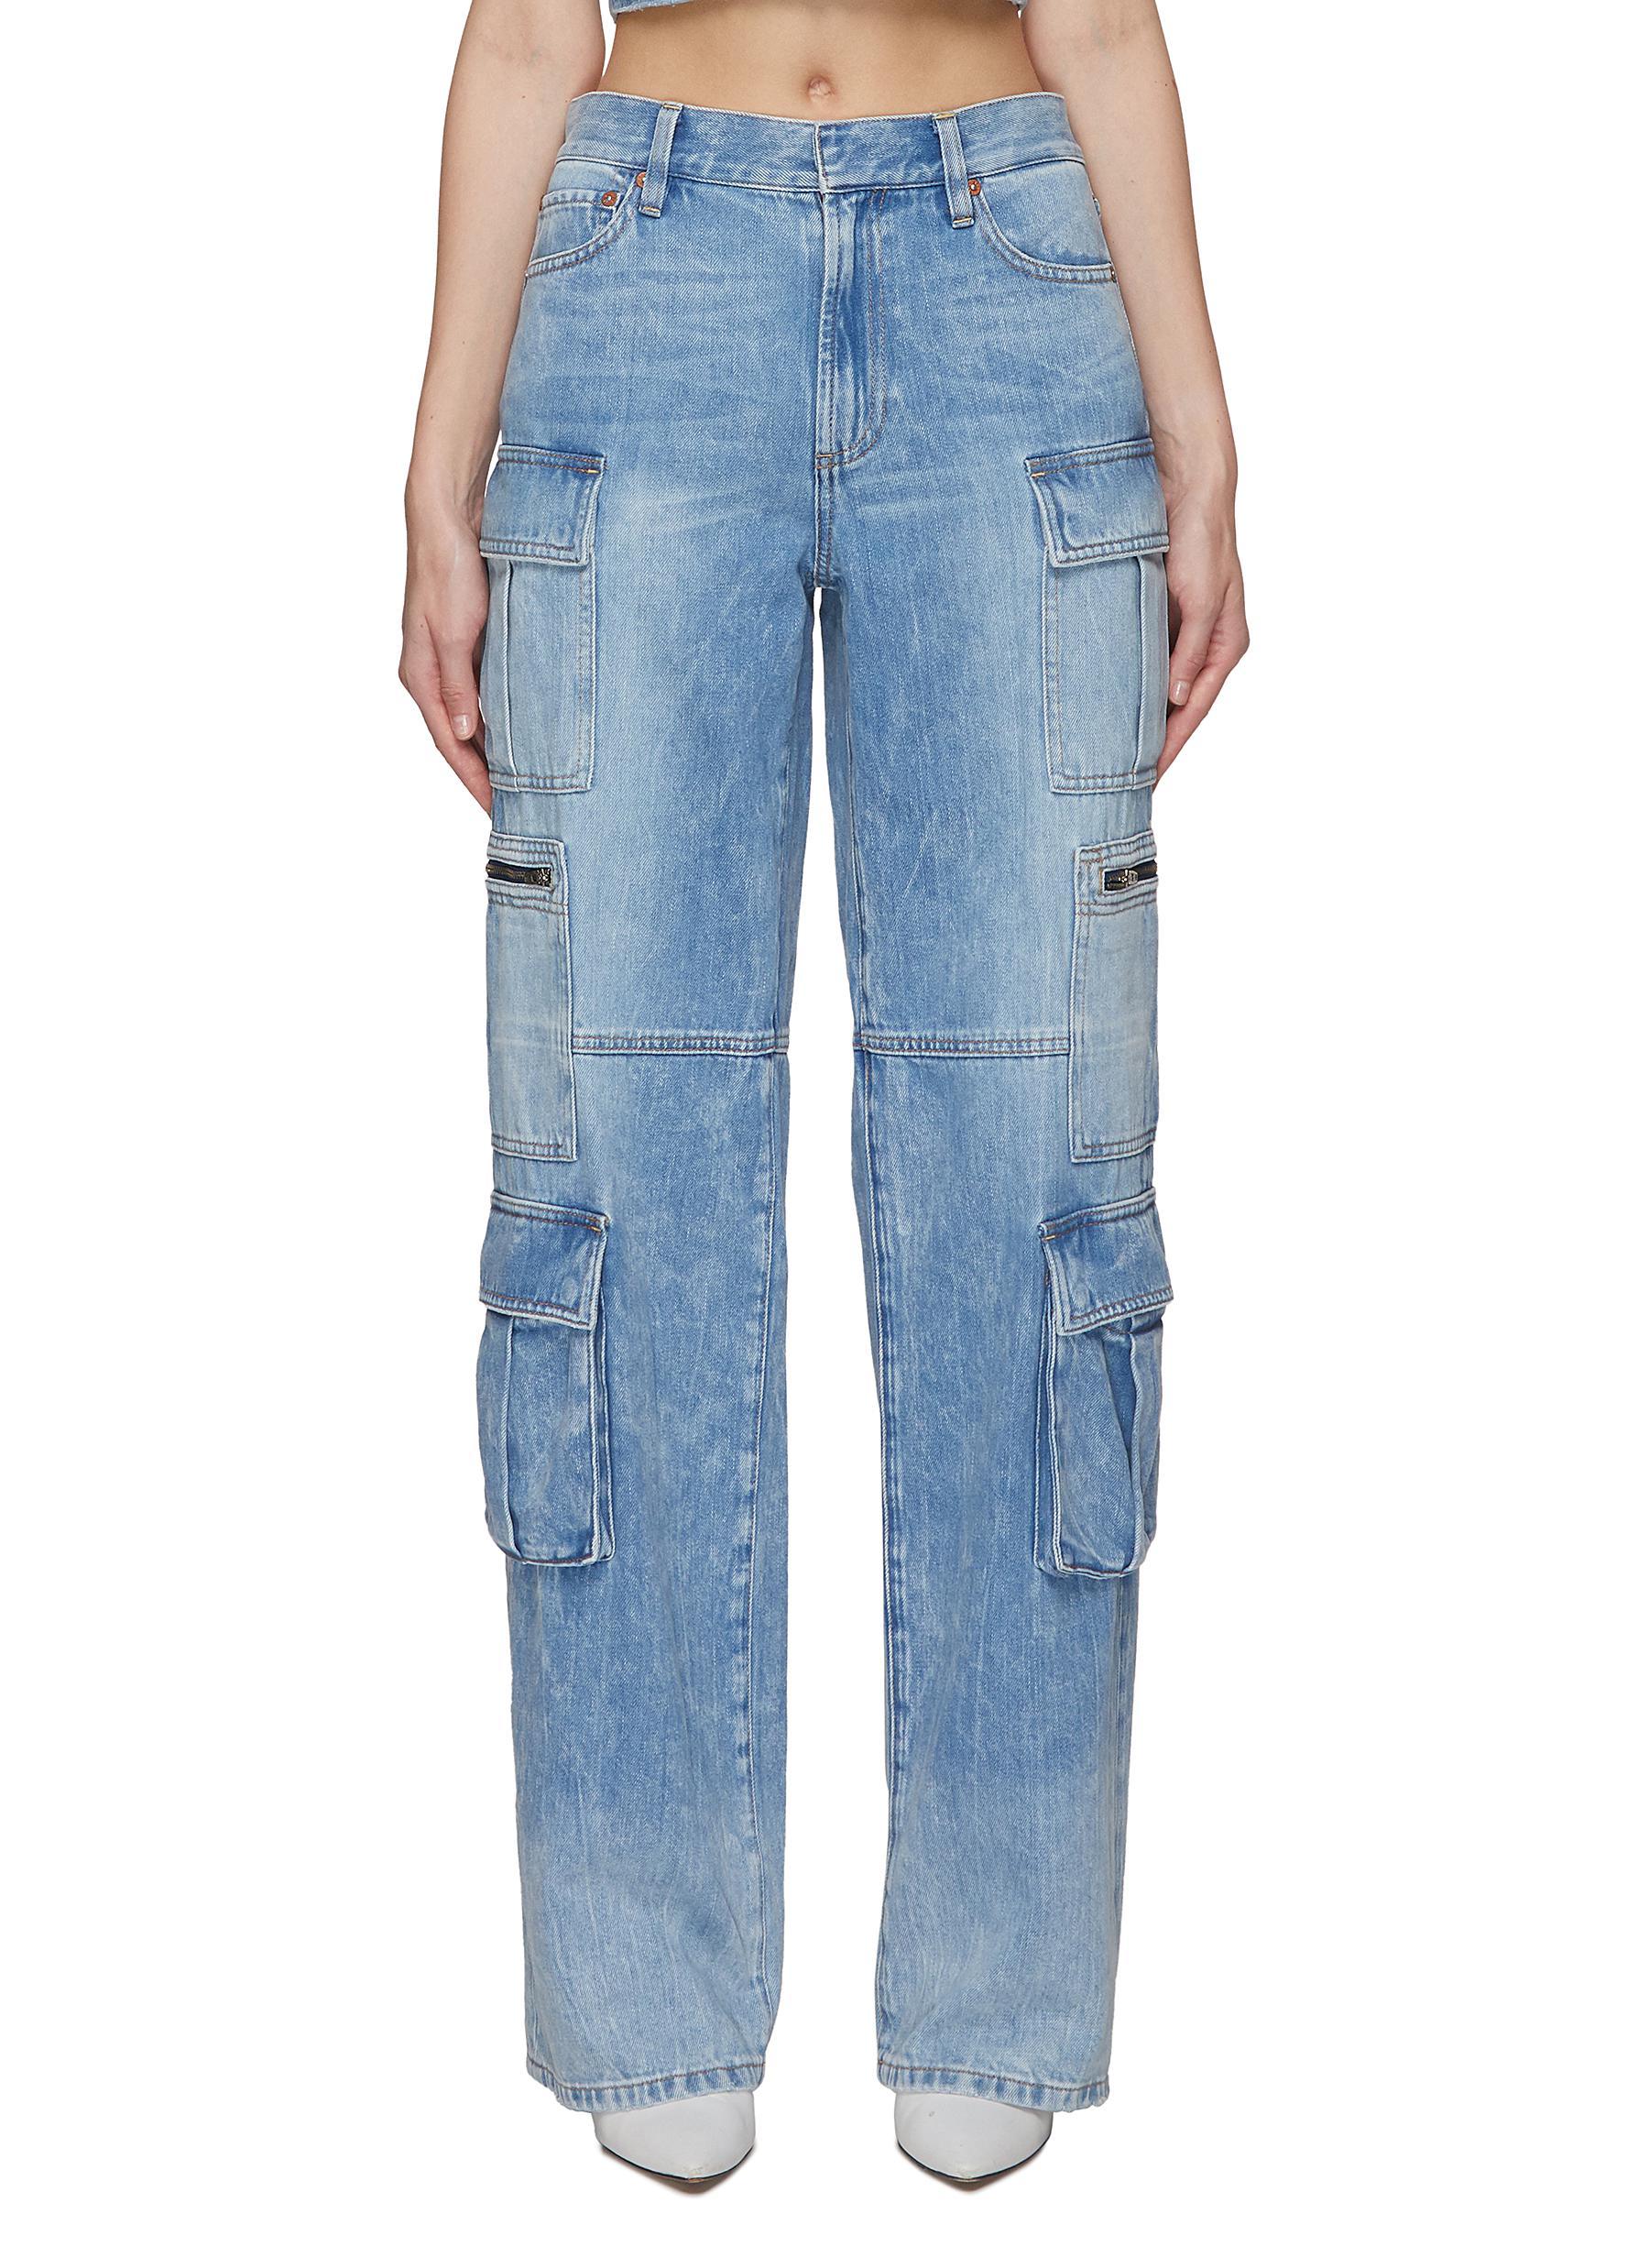 Alice + Olivia 'cay' Pocket Details BAGGY Cargo Jeans in Blue | Lyst